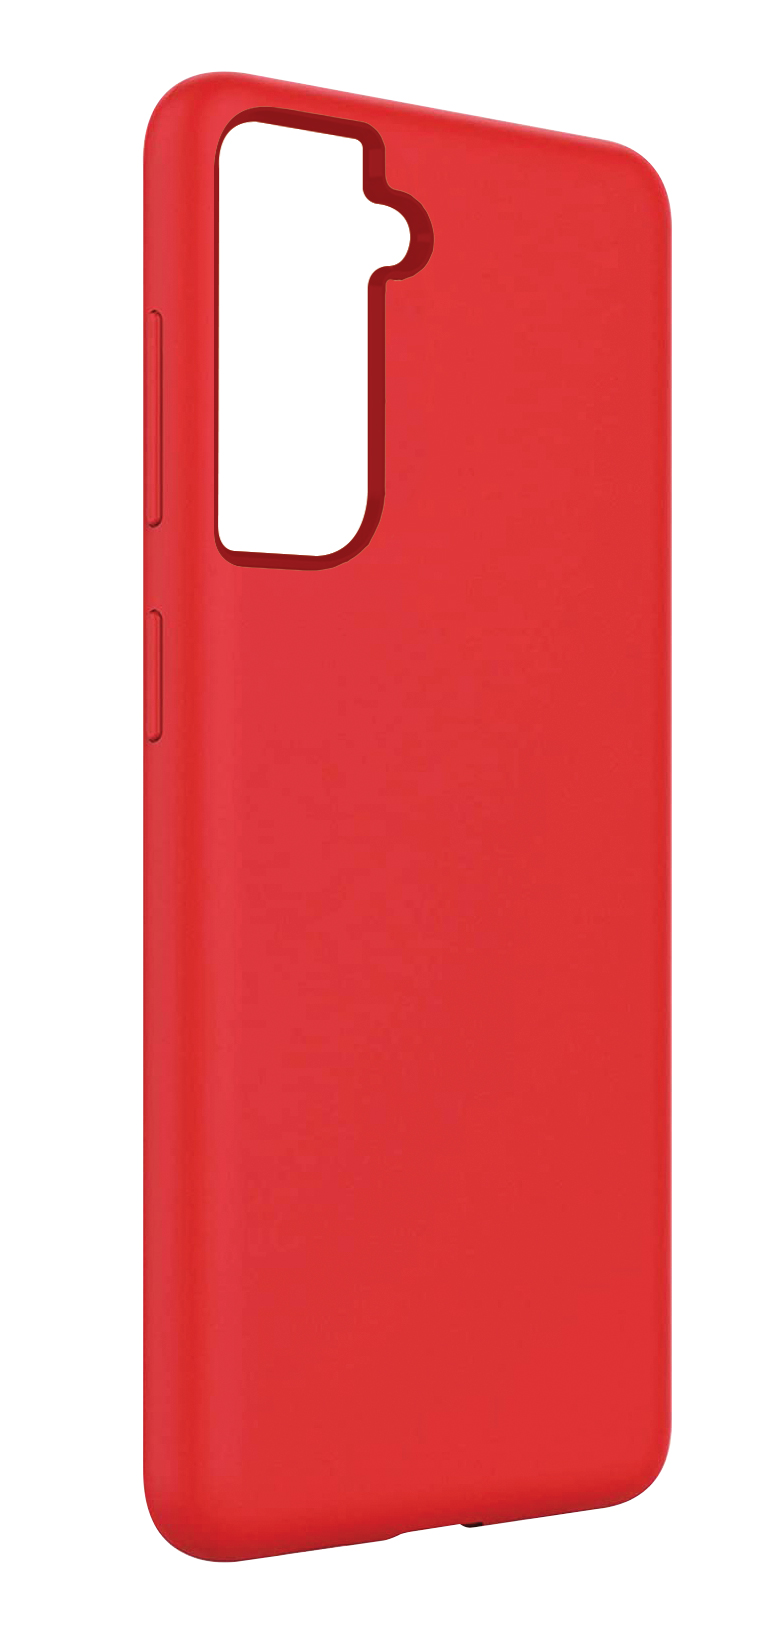 57_1609776127_S21-S21-PLUS-red-silicone-02